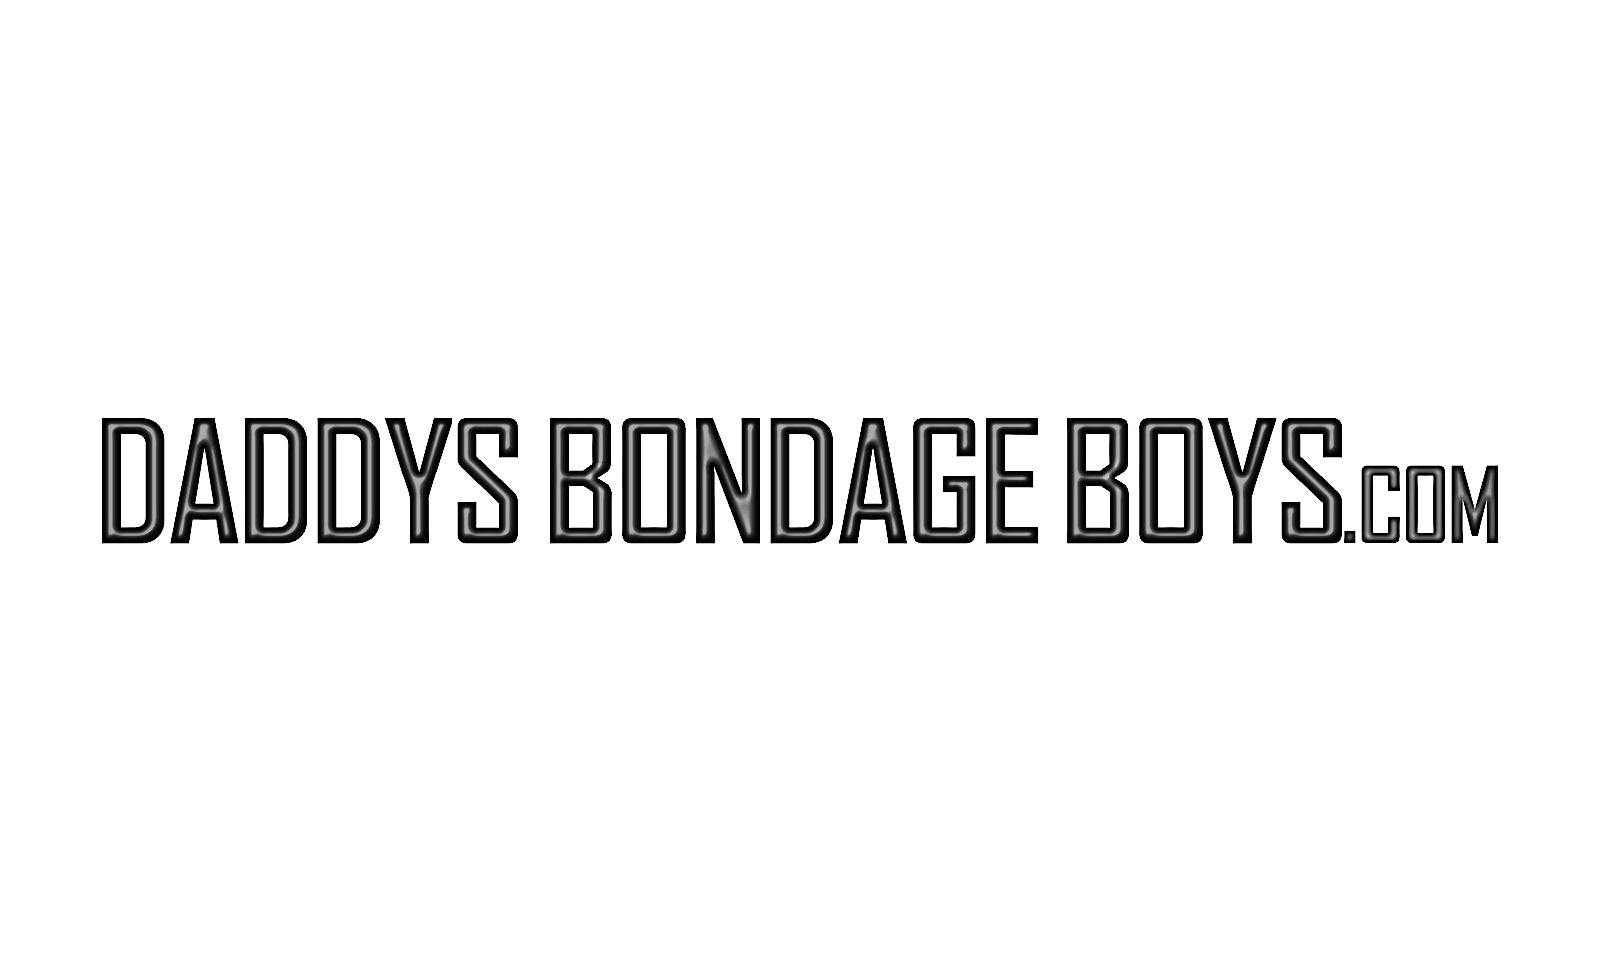 Daddy's Bondage Boys Launches with GunzBlazing